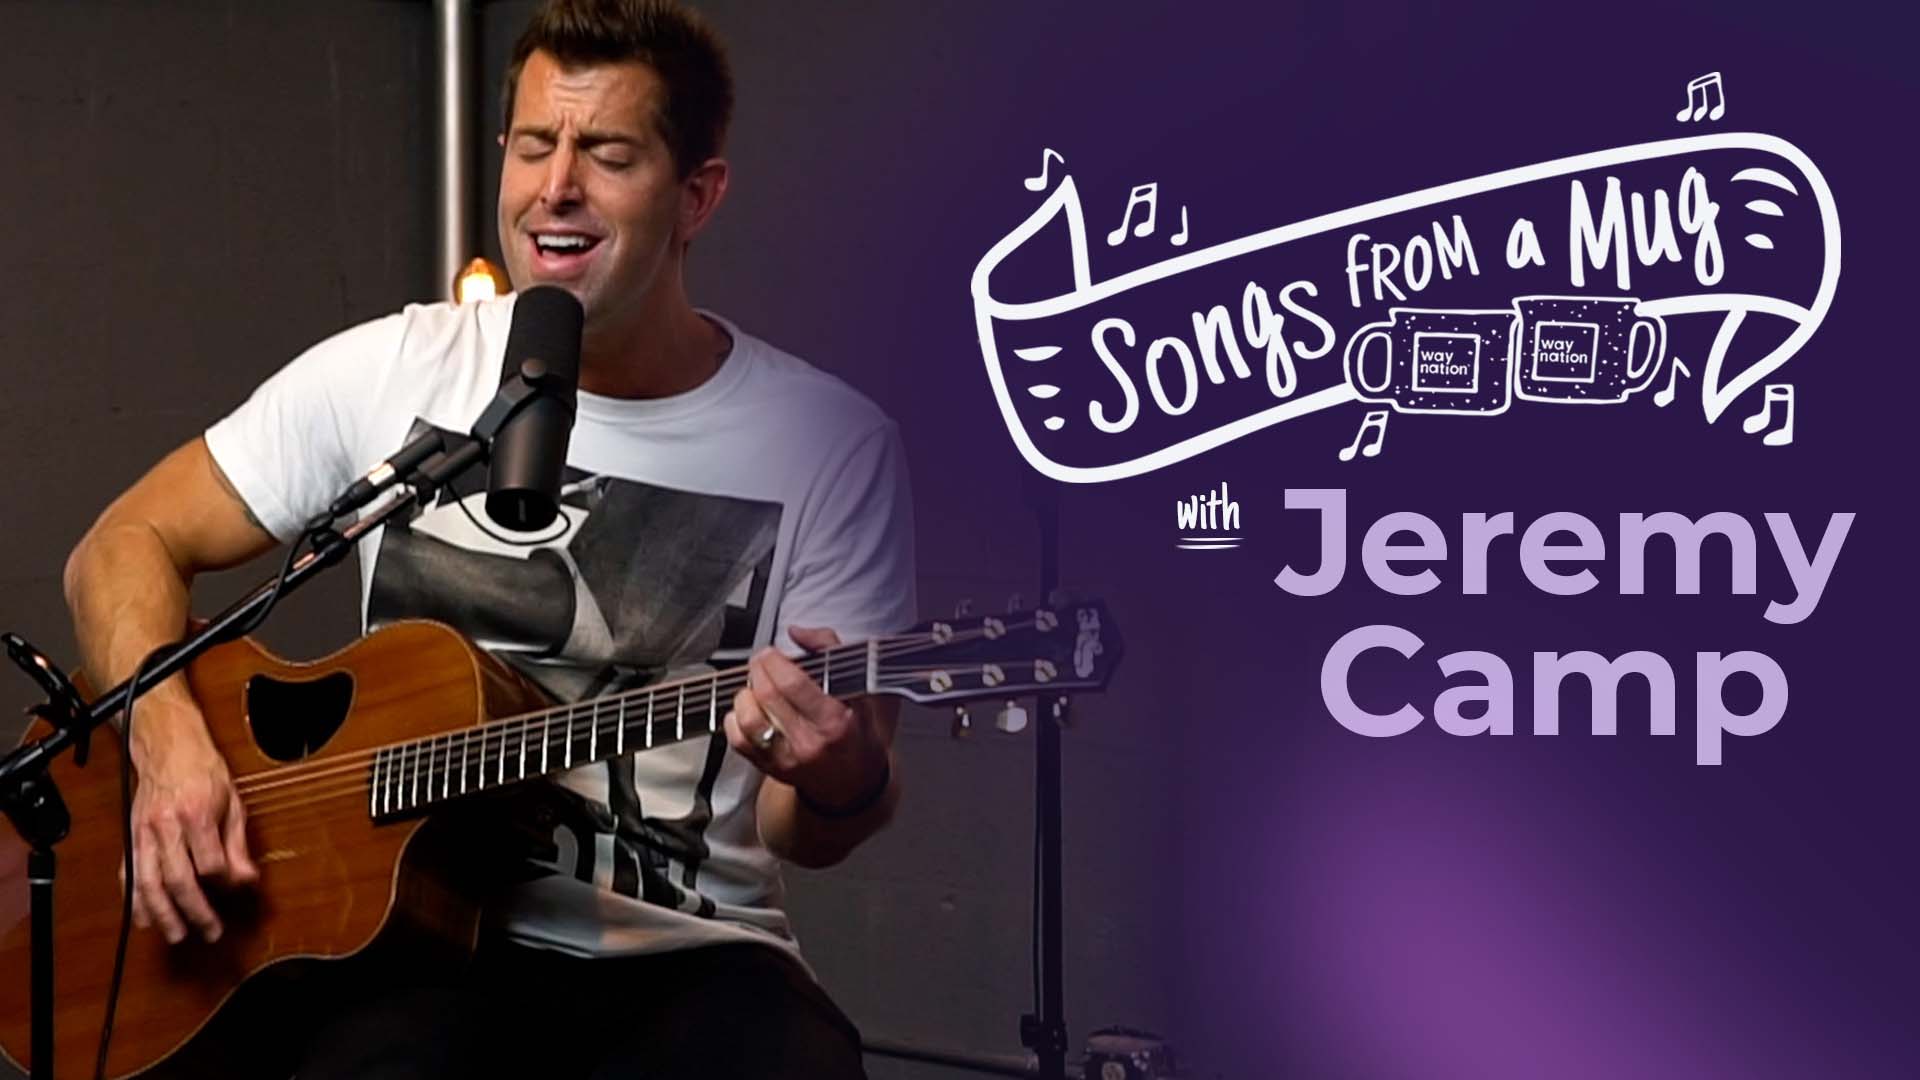 Jeremy Camp Songs From a Mug